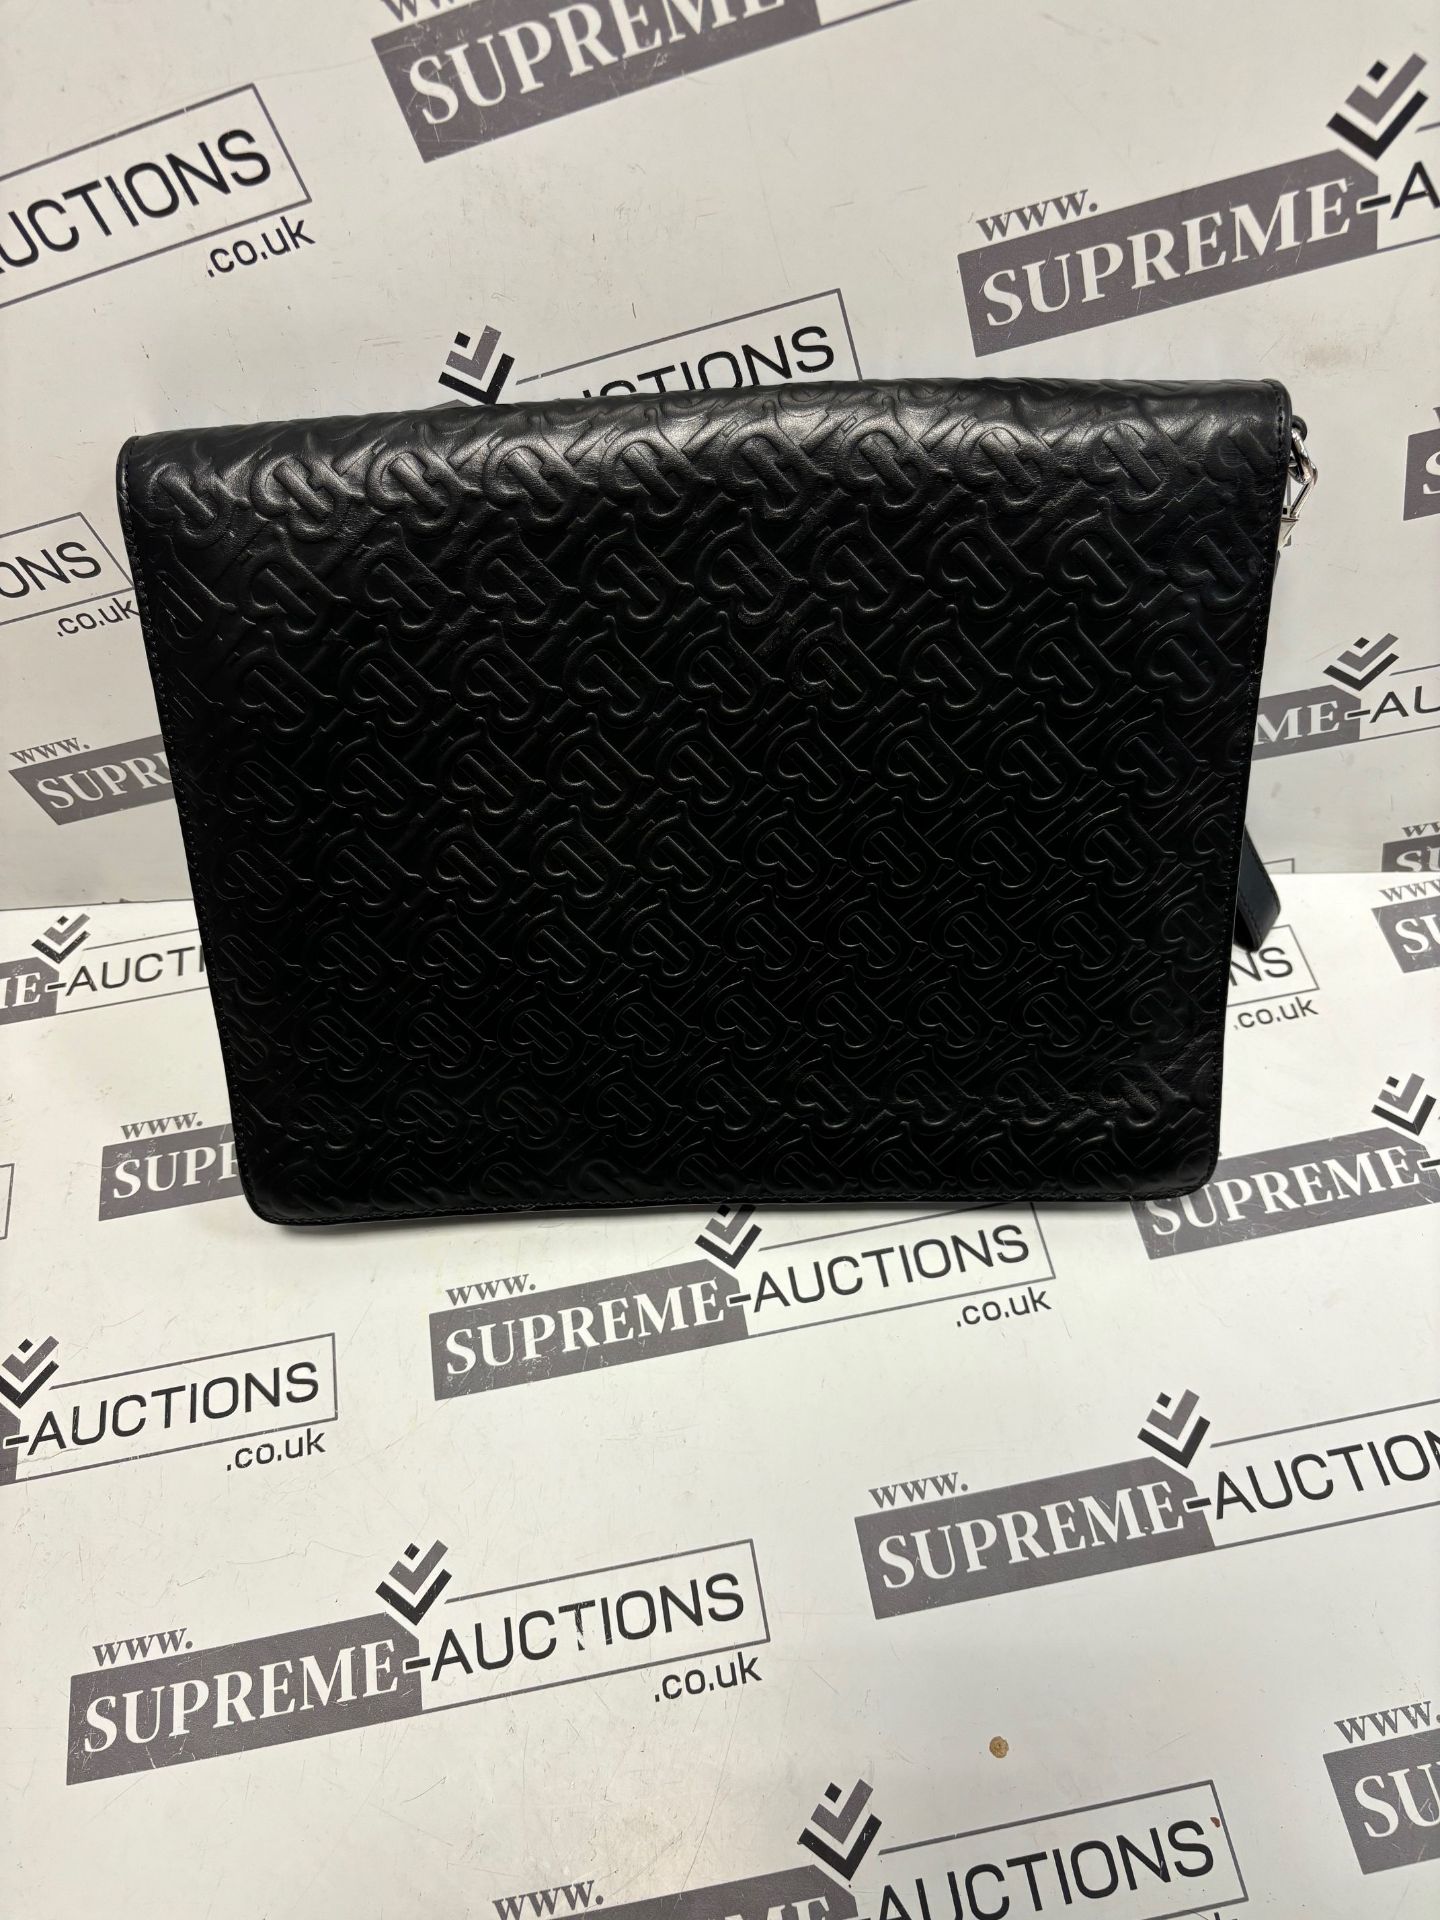 (No Vat) Burberry Envelope clutch, TB embossed leather, Black colour approx 27x35cm. - Image 3 of 7